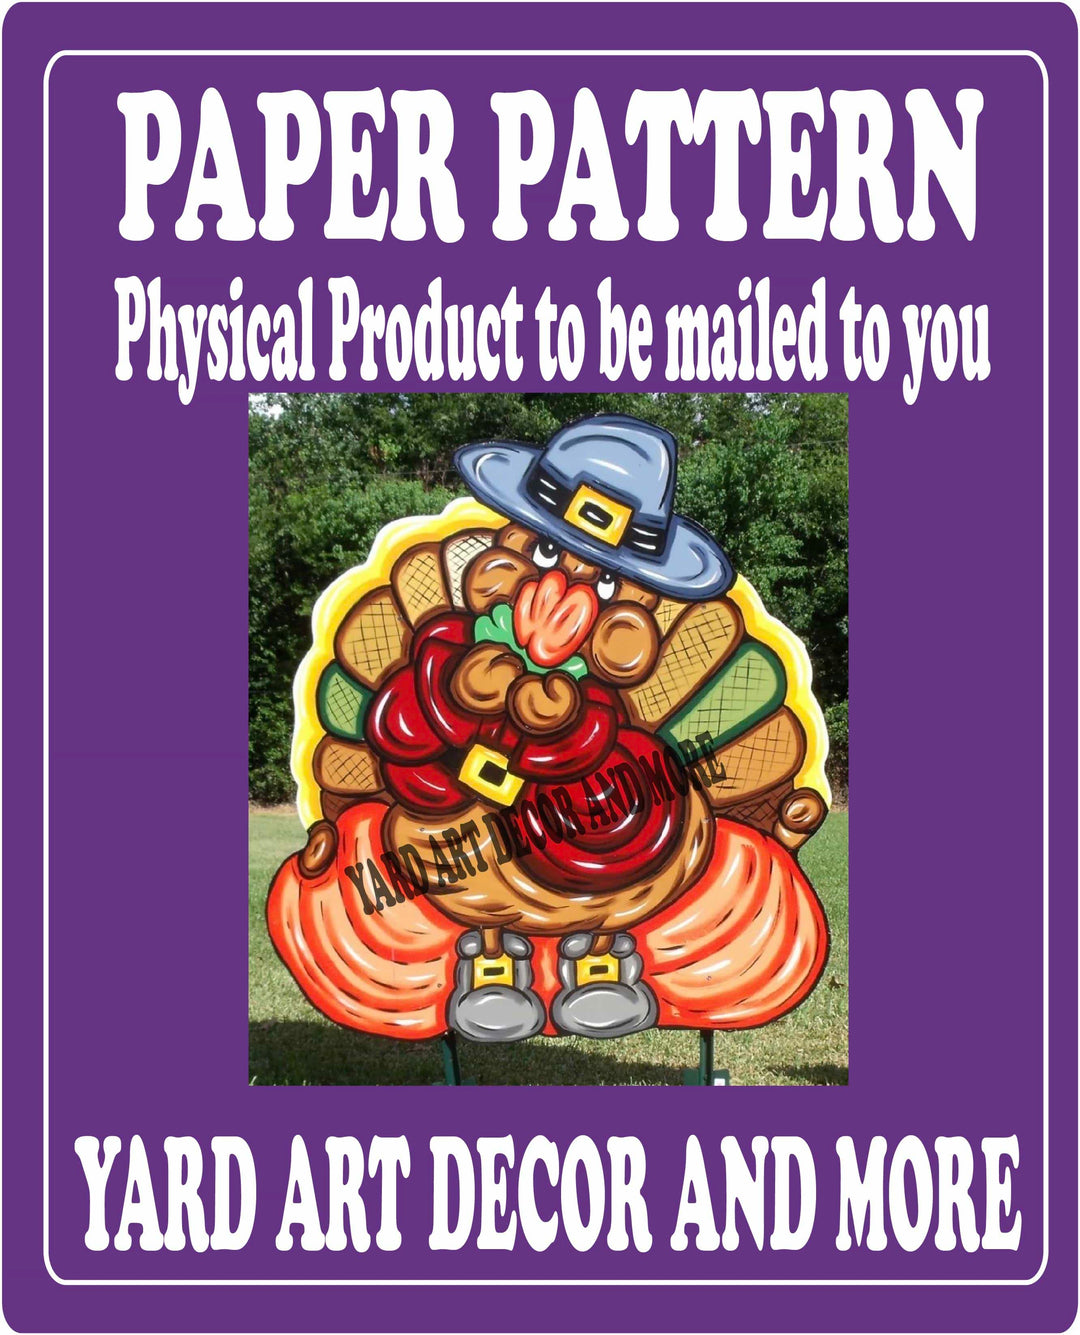 Thanksgiving Turkey with gray boots and pumpkin yard art decor paper pattern